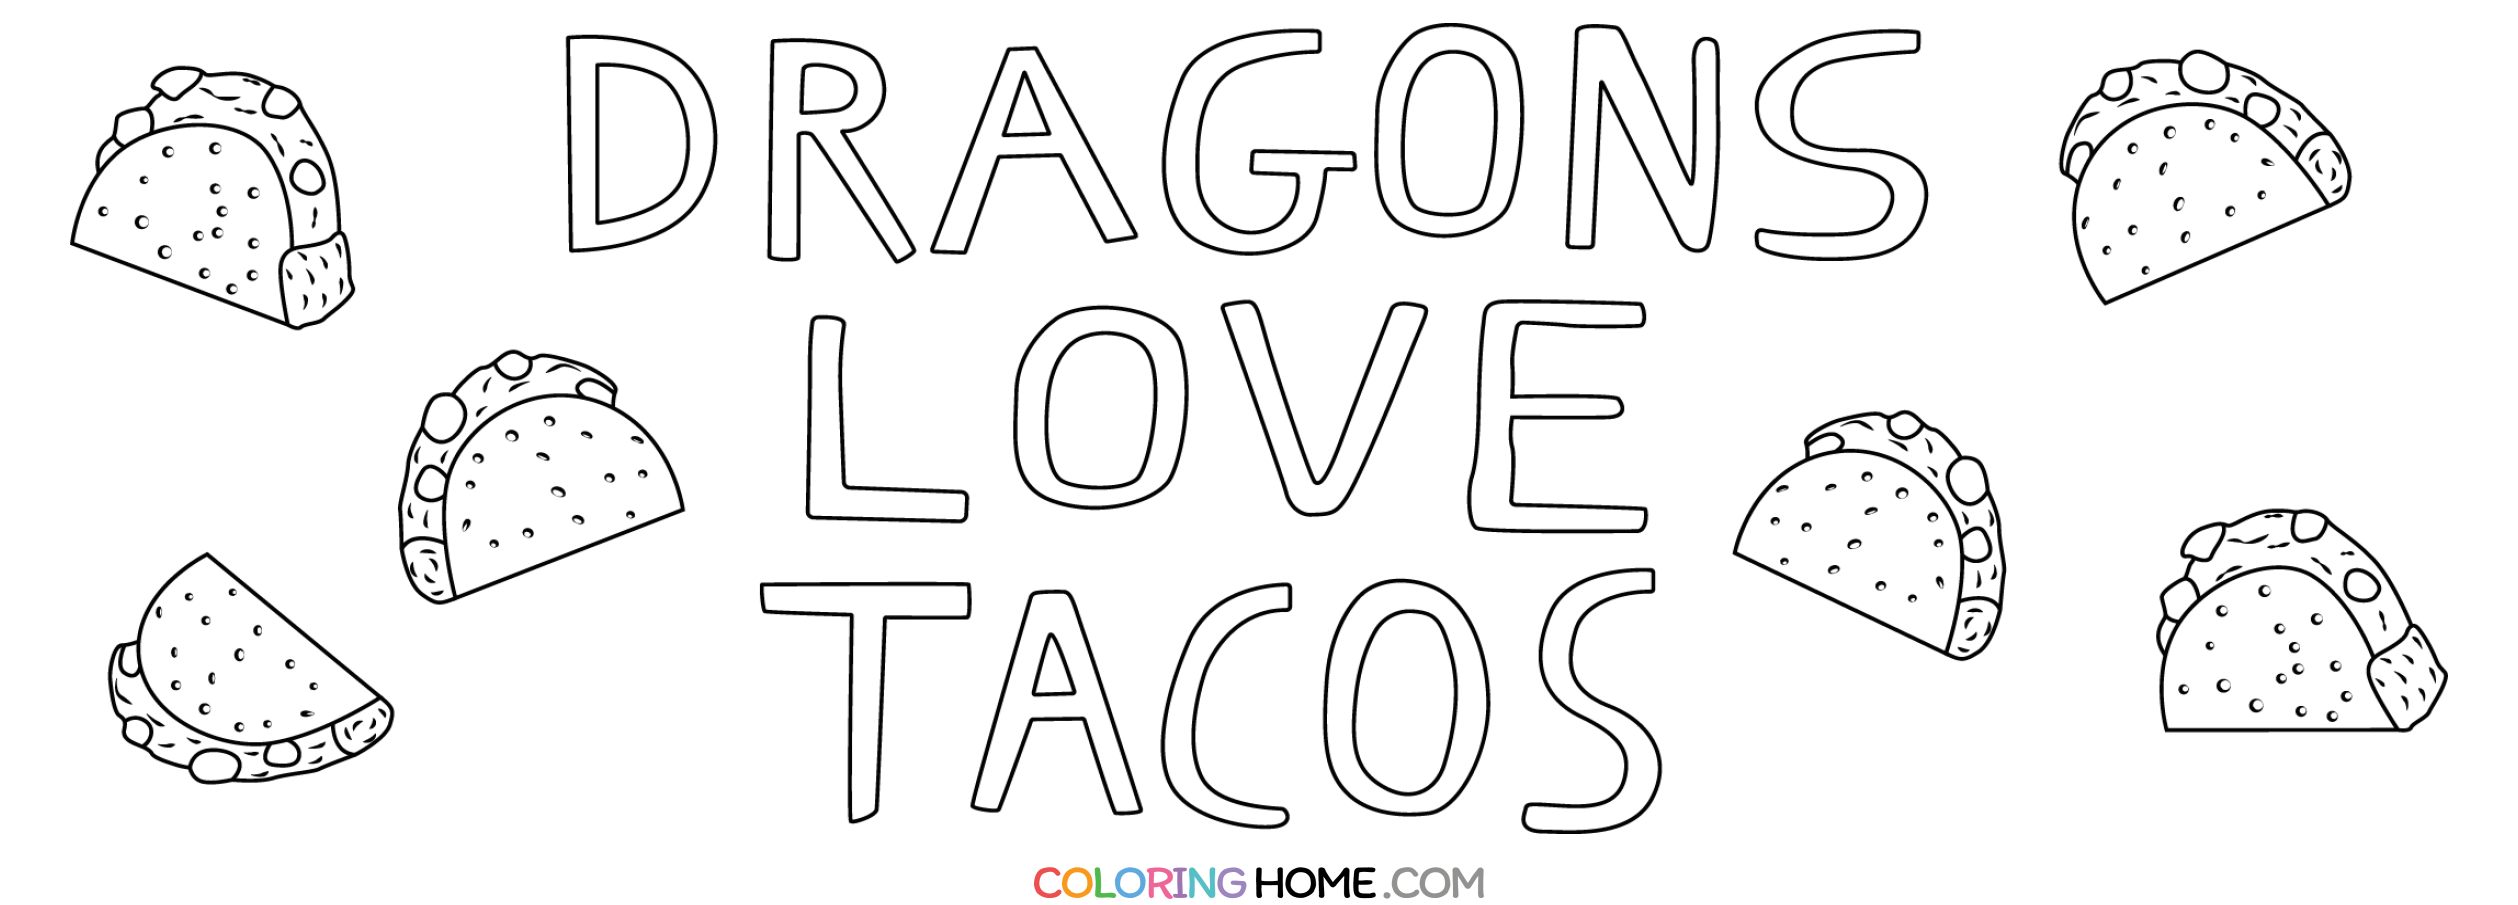 Dragons Love Tacos coloring page